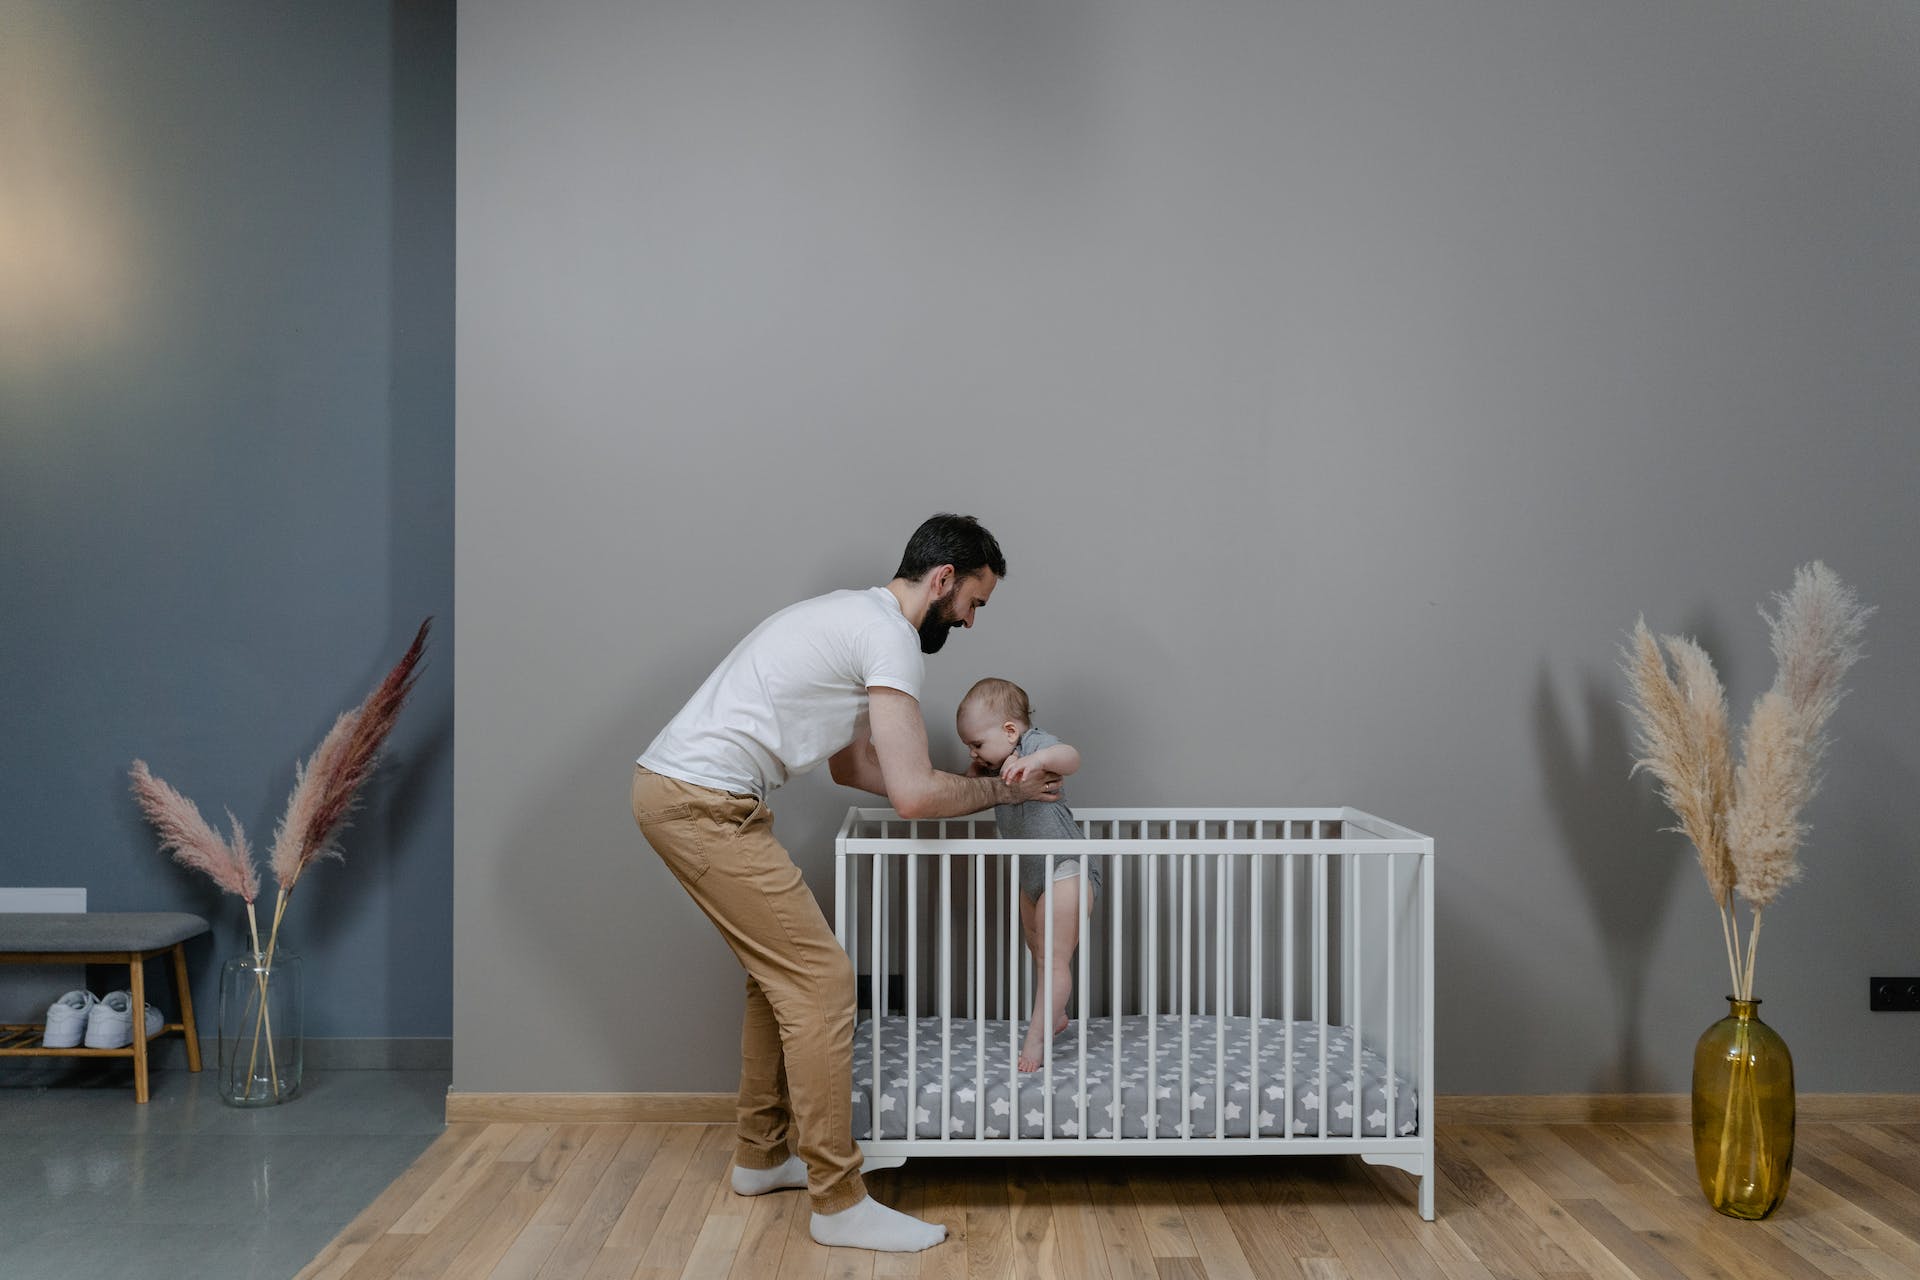 A man holding a child in a crib | Source: Pexels